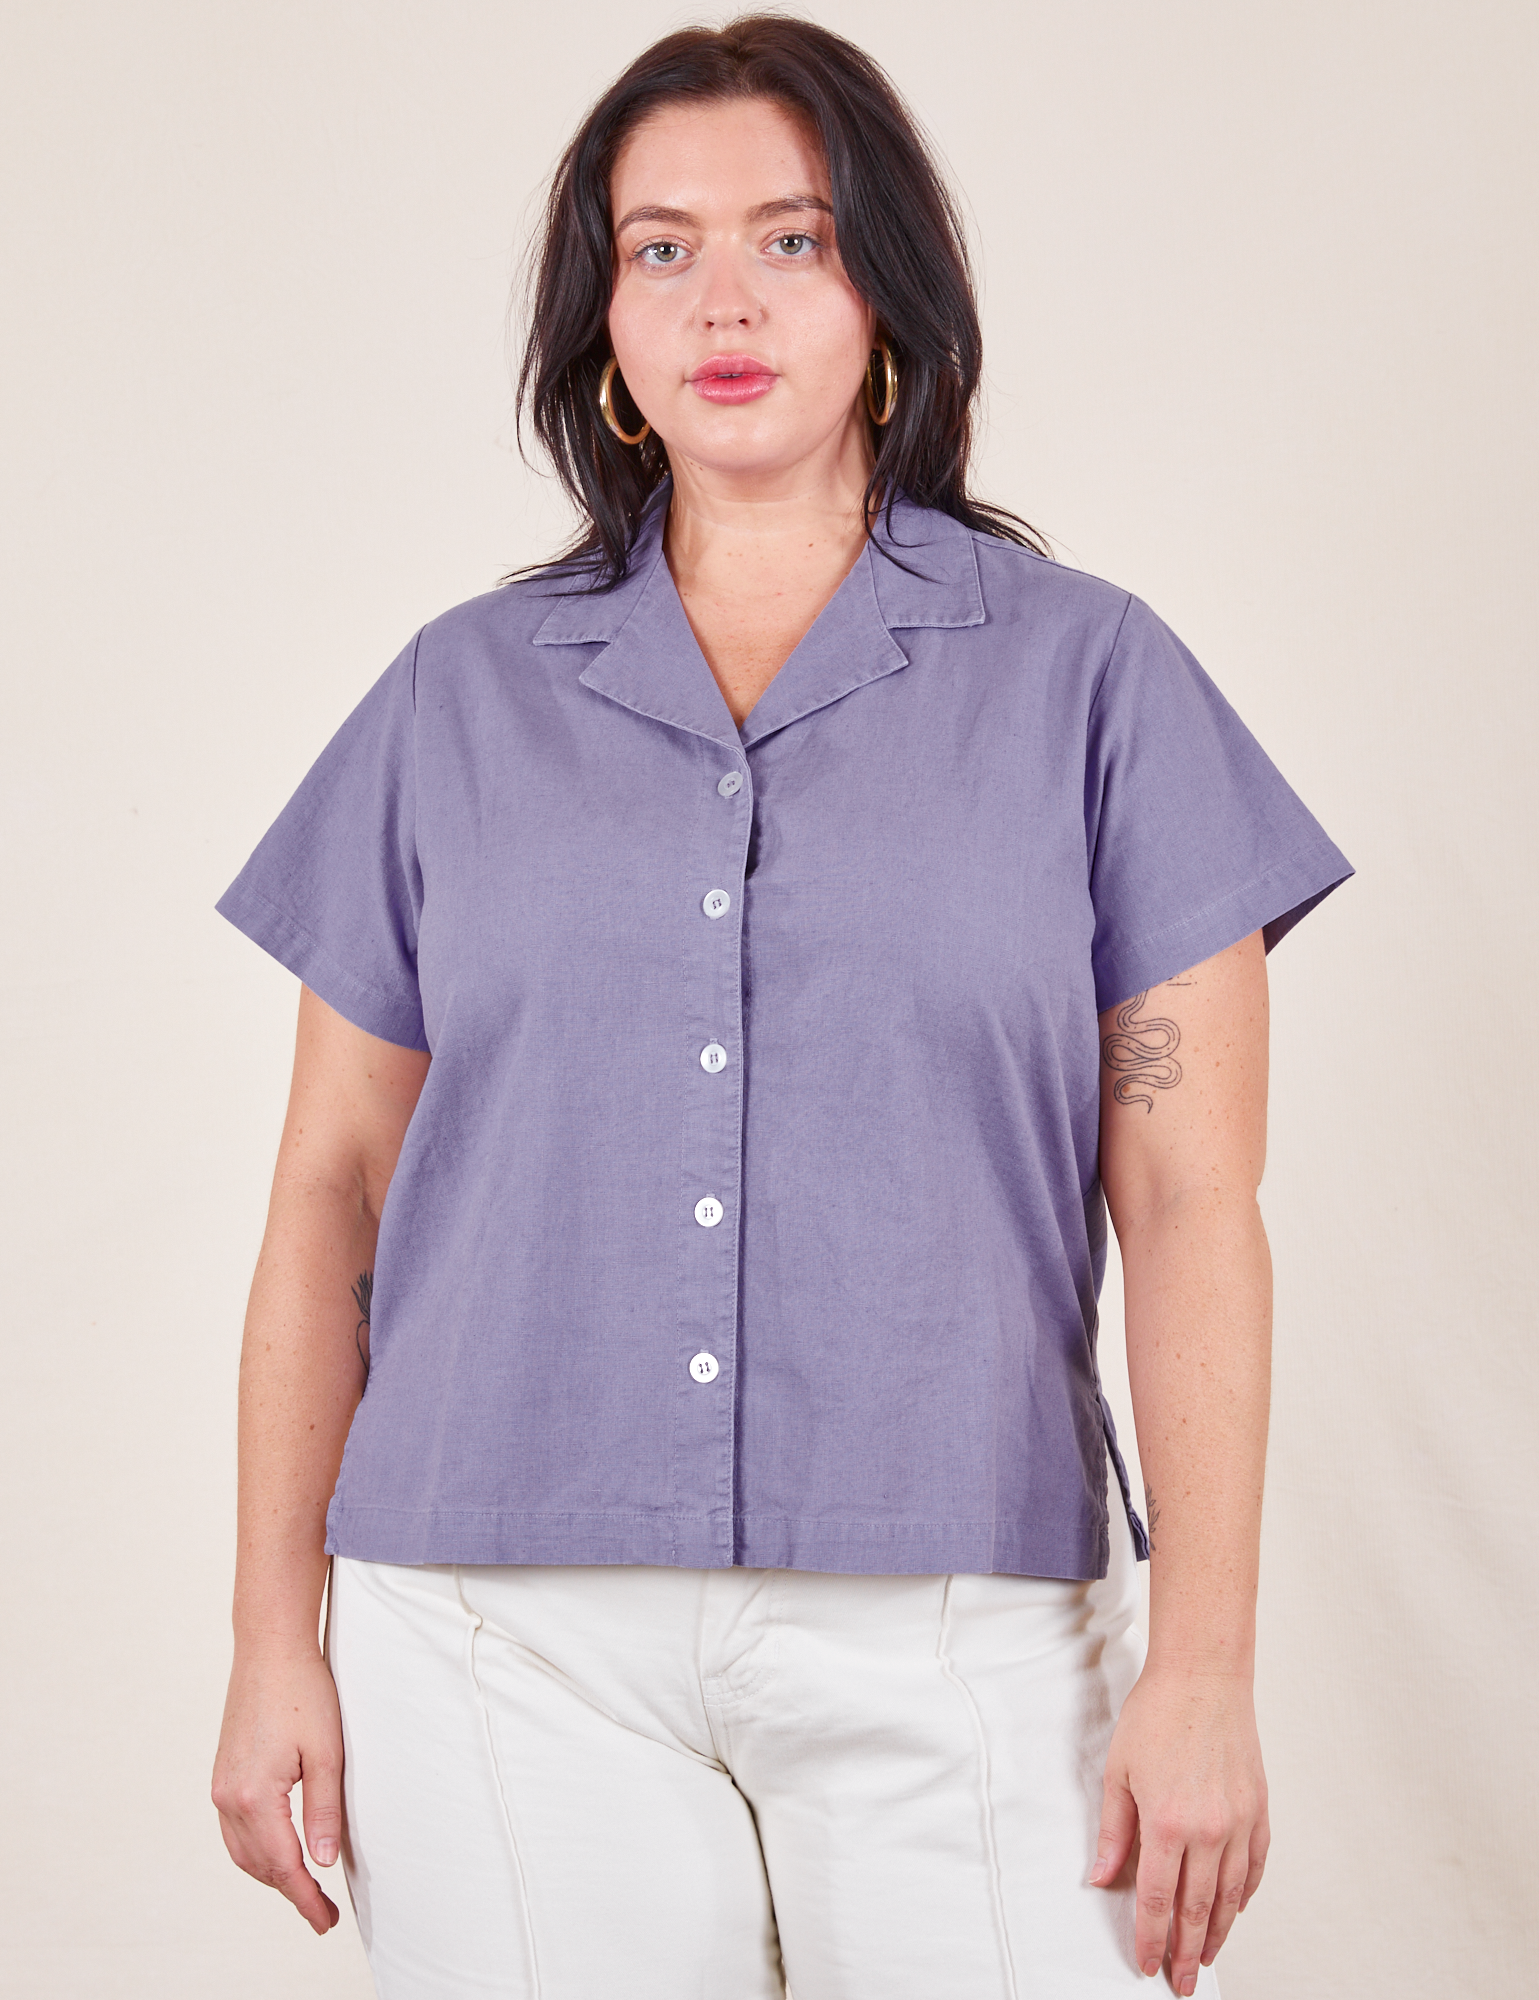 Faye is wearing Pantry Button-Up in Faded Grape